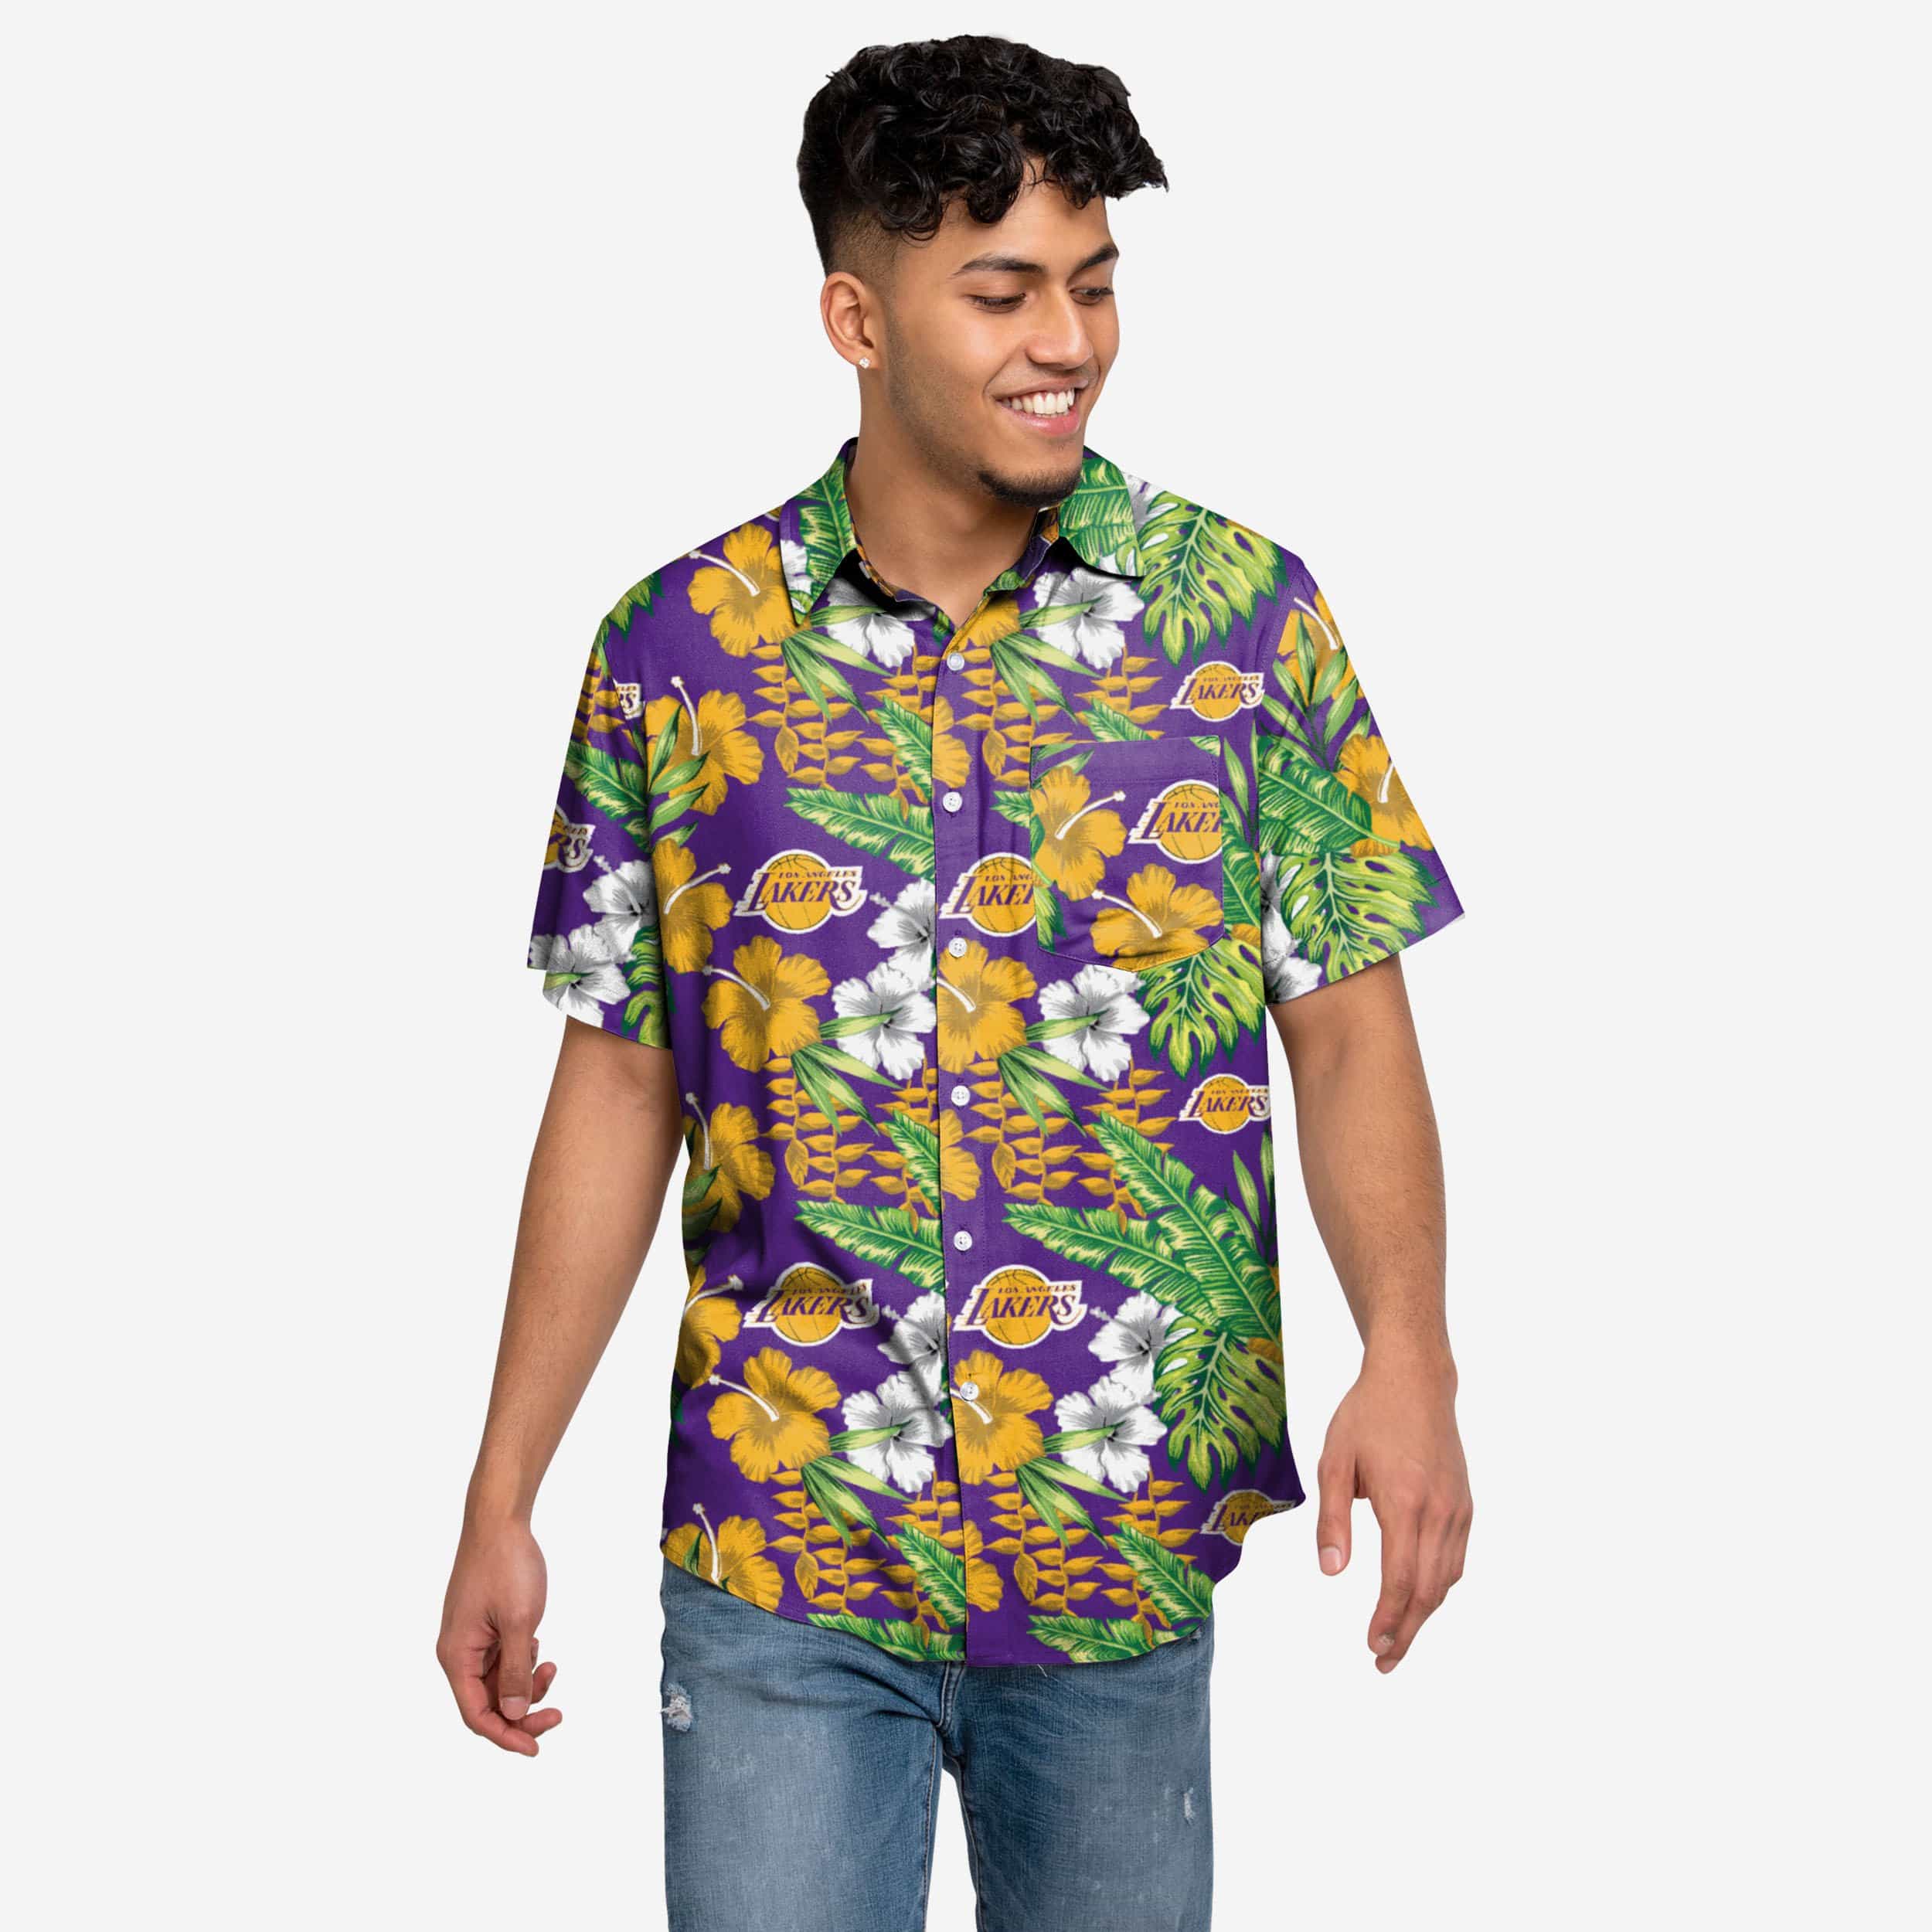 lakers button up shirt